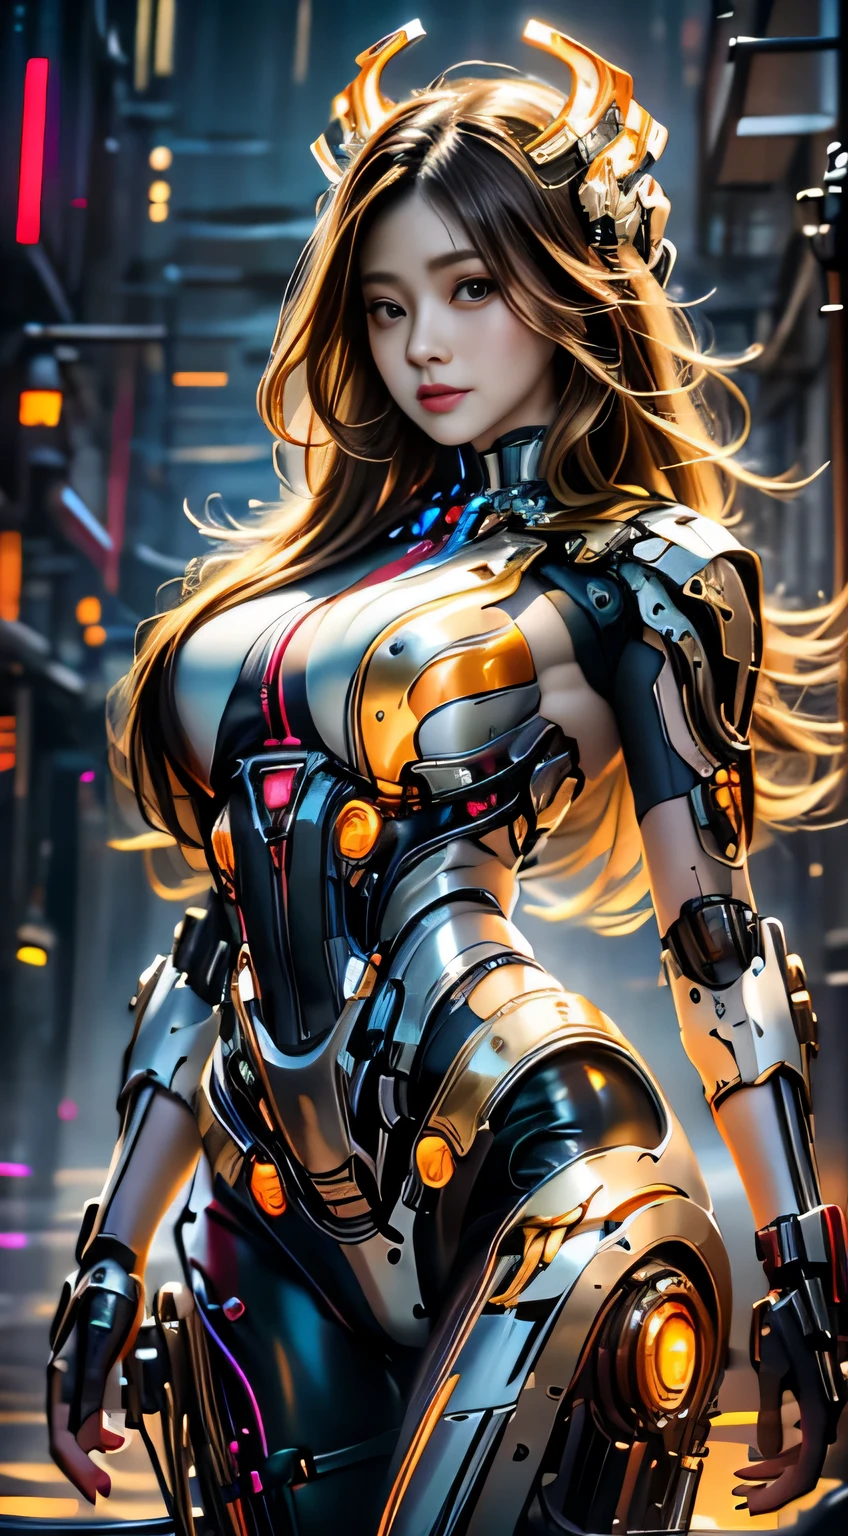 Virtual image,Realistic 8K images,hips up,Masterpiece,Complete Anatomy,Complete dynamic composition,morning sun,Light hits the front,young woman with long brown hair,cybernetic robot((white, yellow, and a red cyberpunk figure.)),Bikini body-white_orange_gold_metal,,white tank top,Abstract city background at night